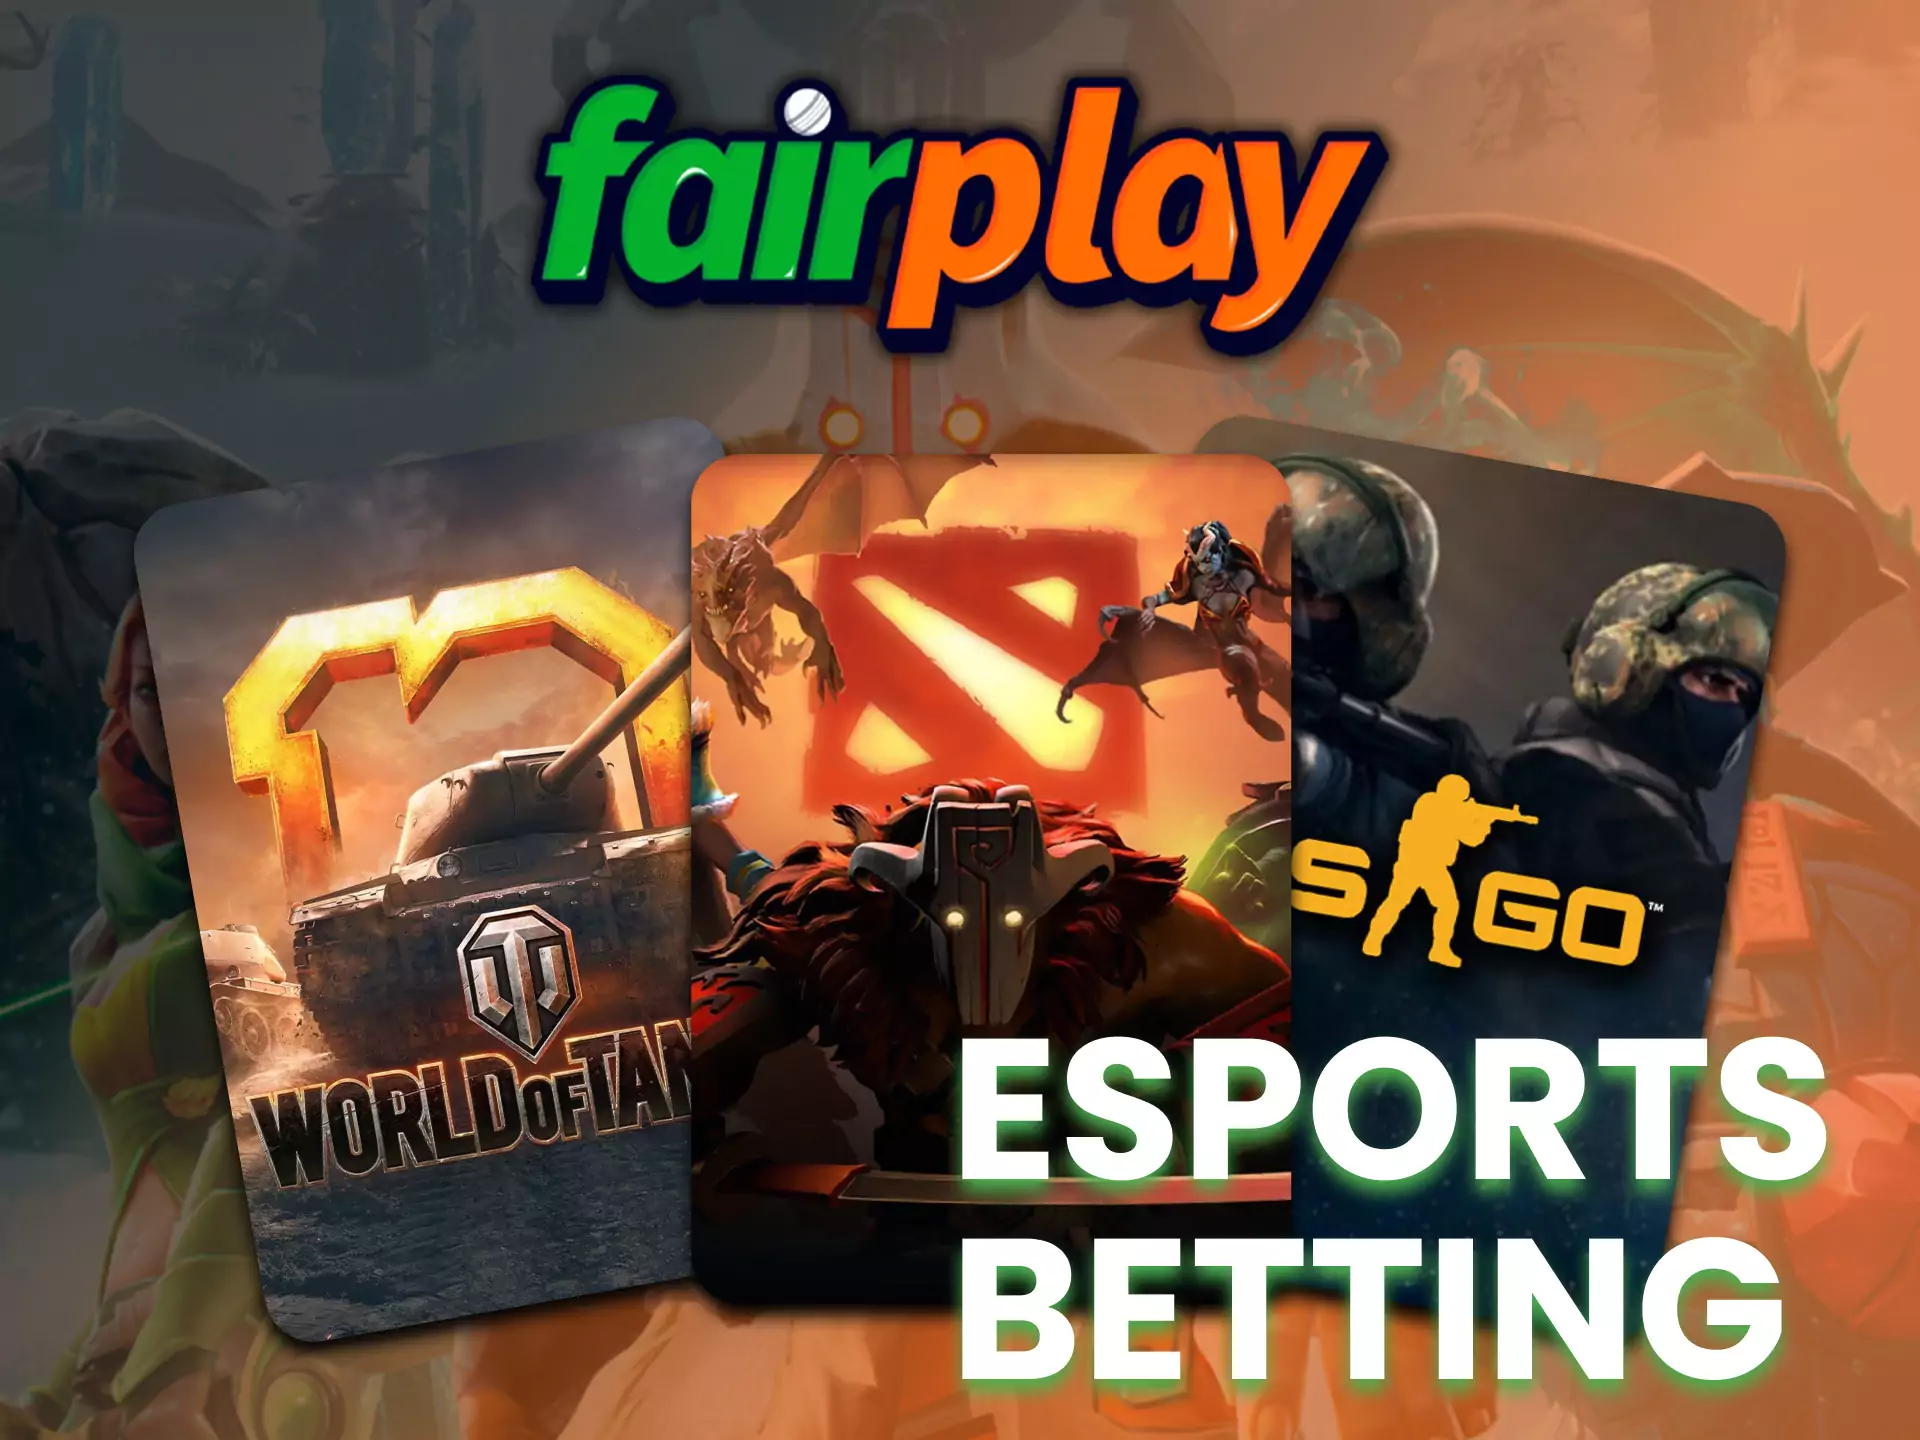 If you're an esports fan, bet on your favorite team on Fairplay.